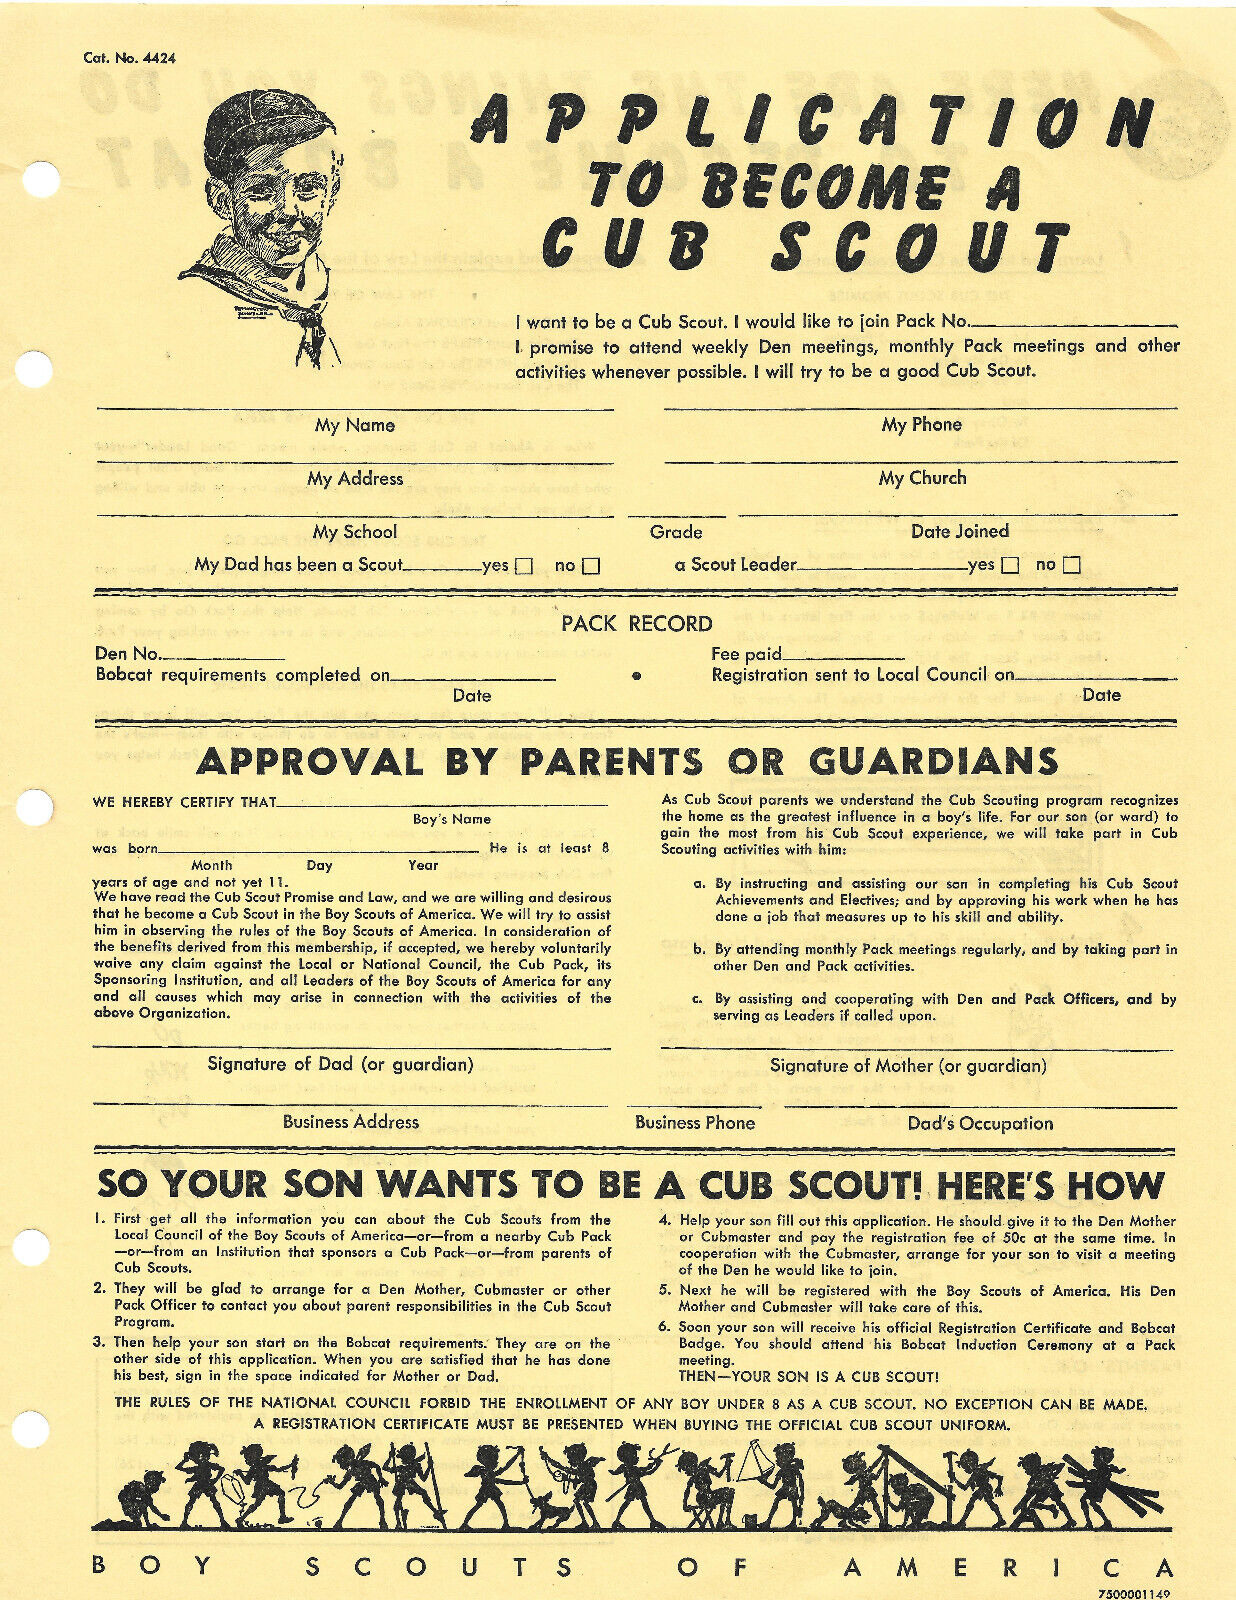 OLD Application to Become A Cub Scout / BOBCAT Info Vintage Catalog Number 4424